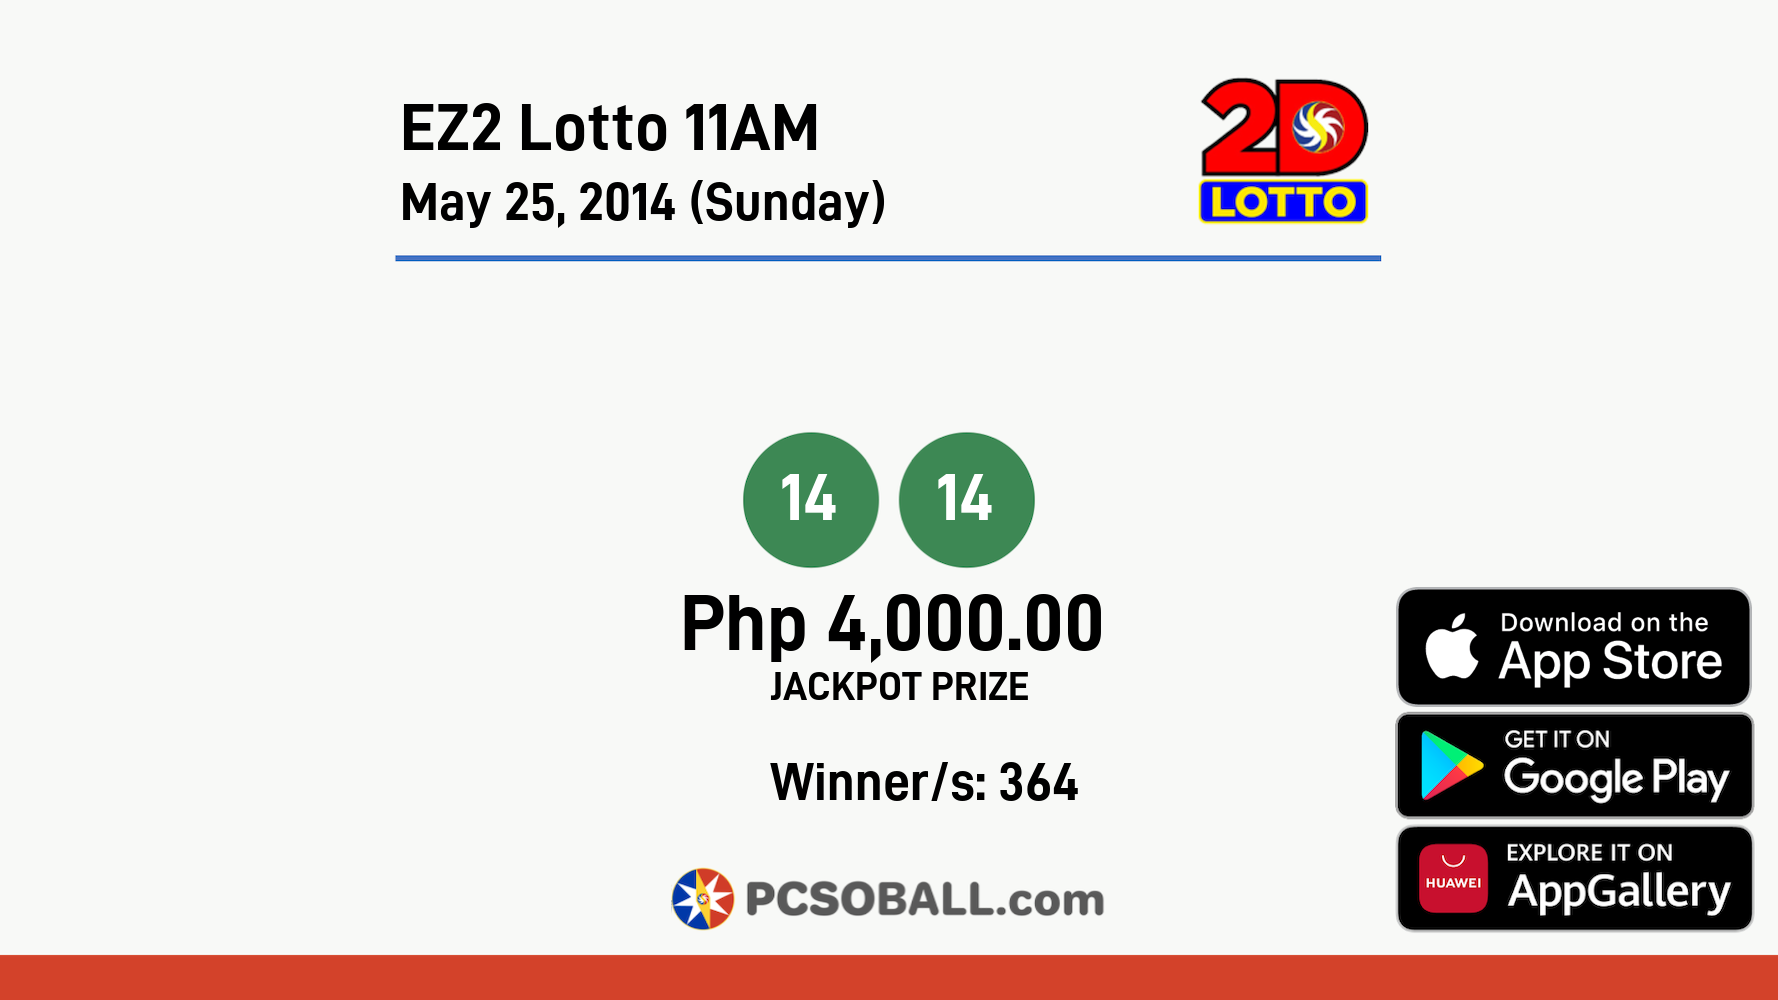 EZ2 Lotto 11AM May 25, 2014 (Sunday) Result